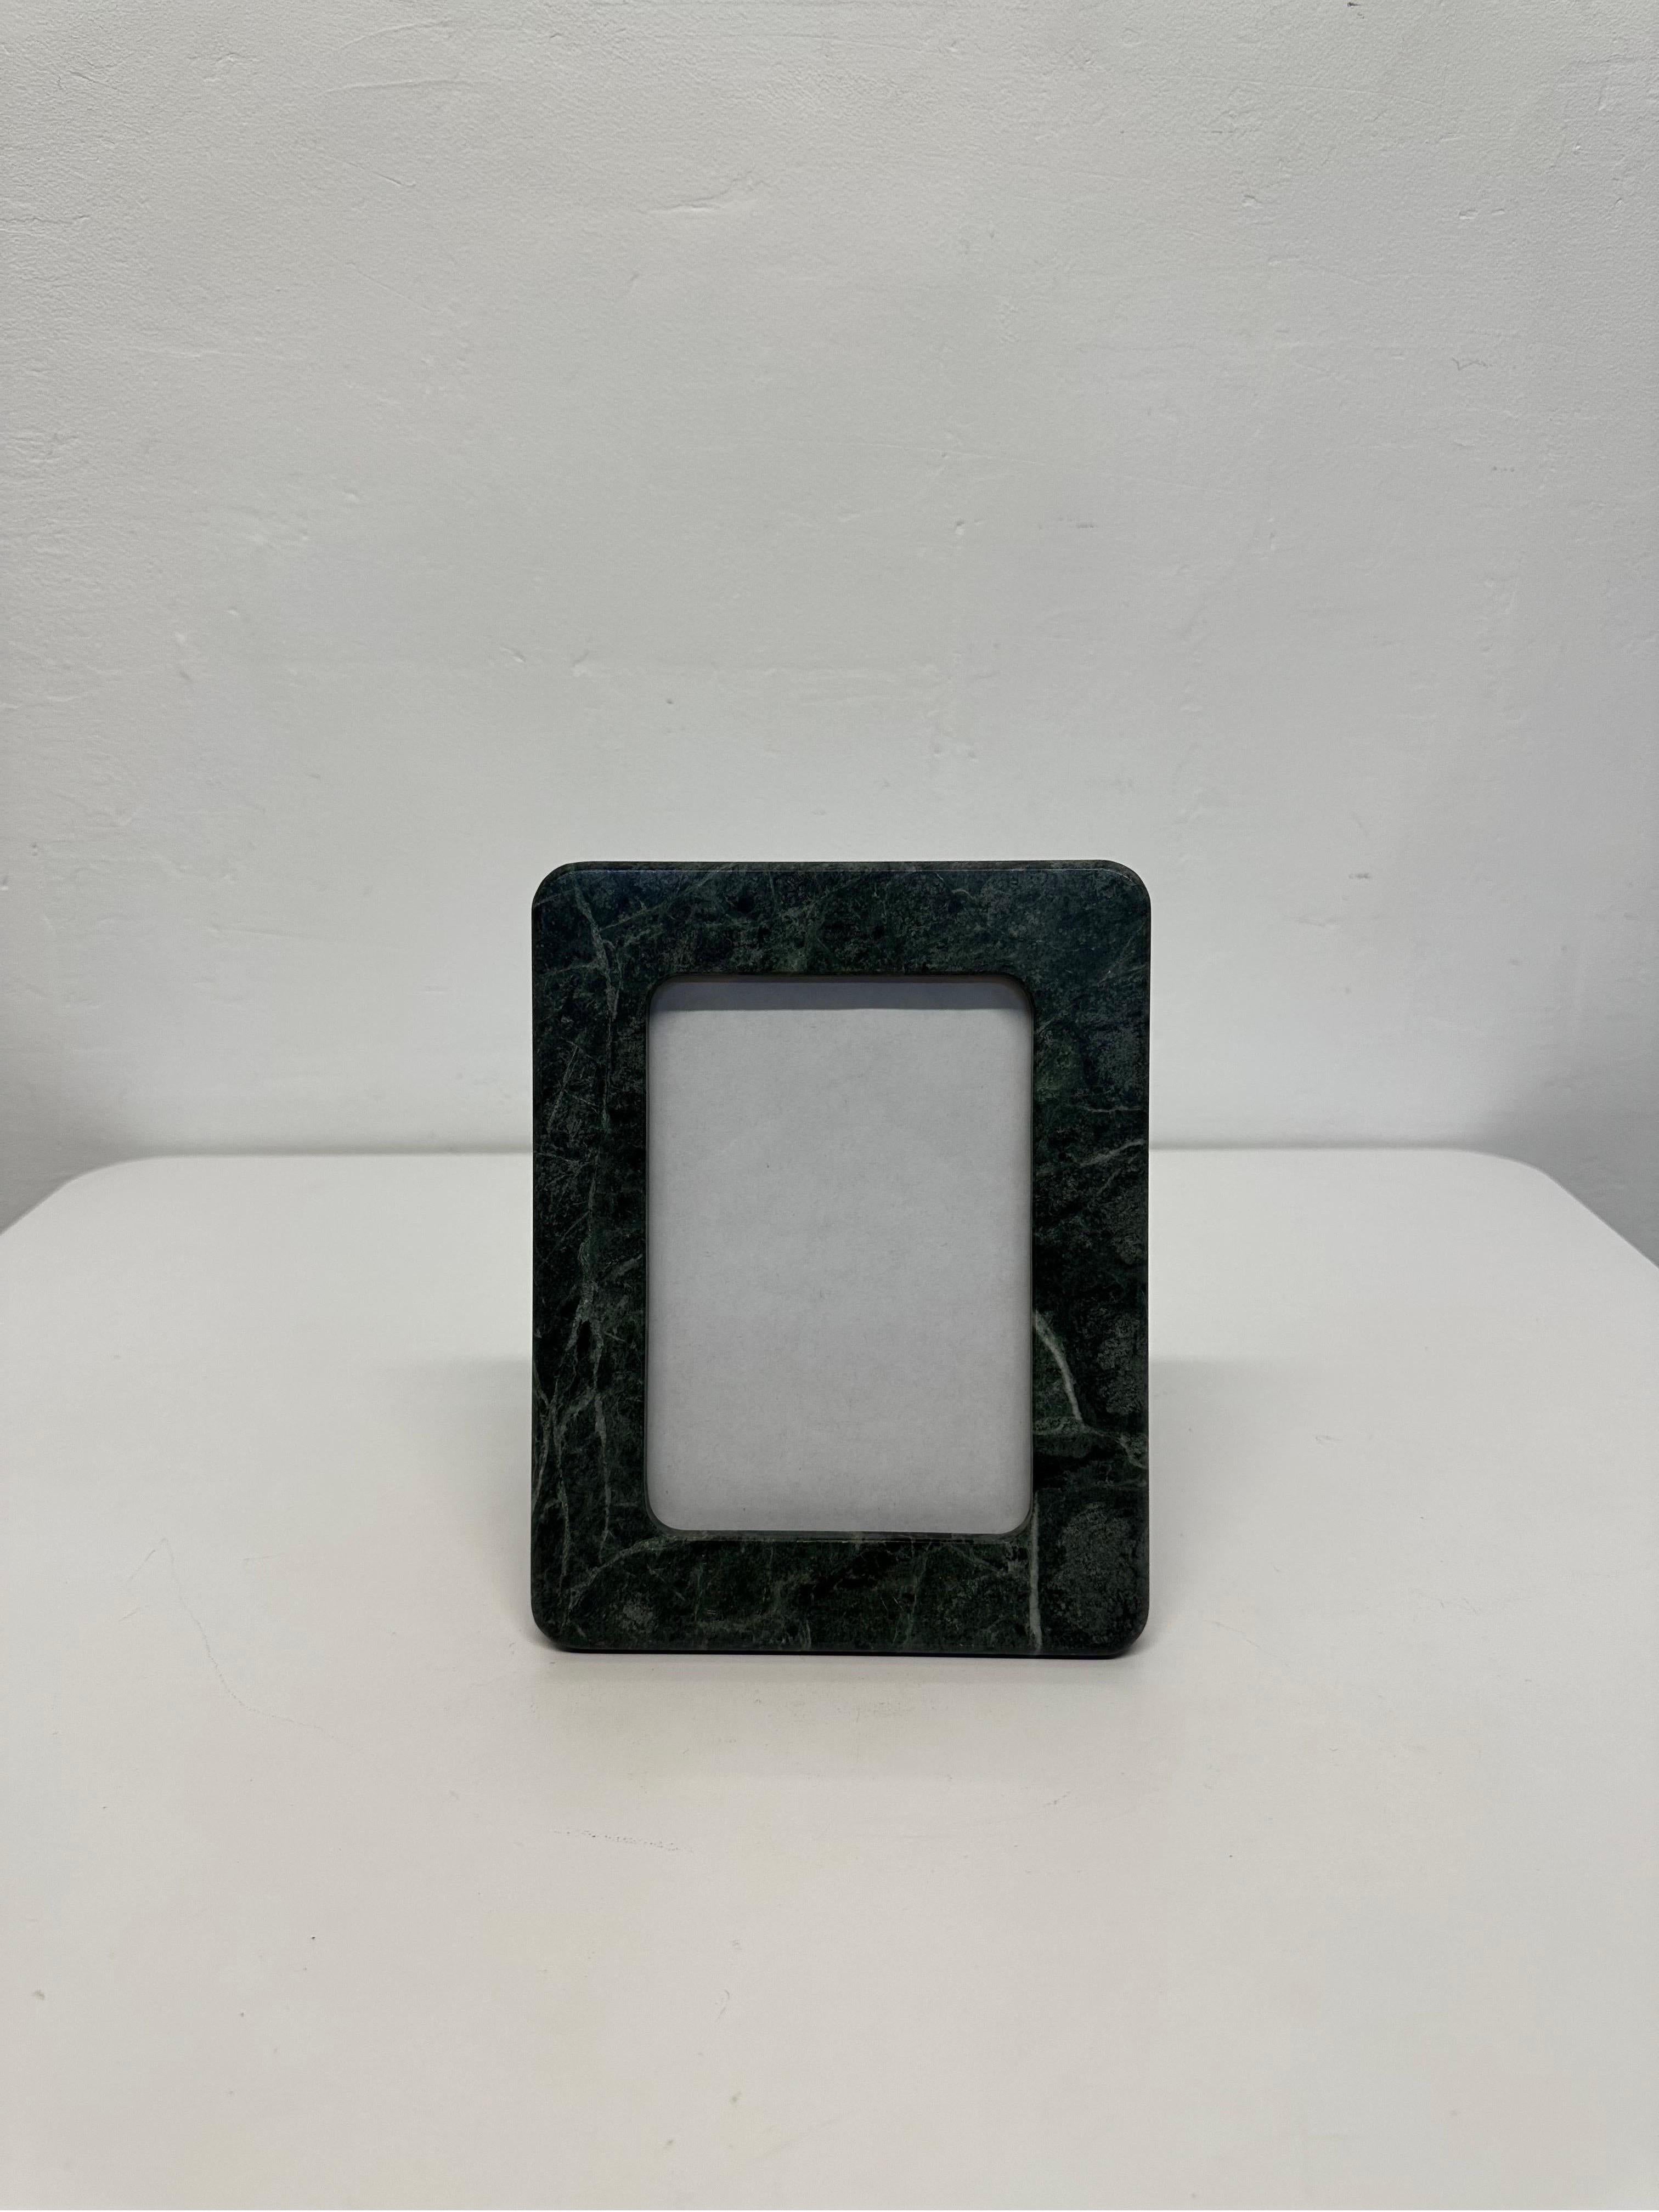 Green marble with white veining photo frame circa 1980s.